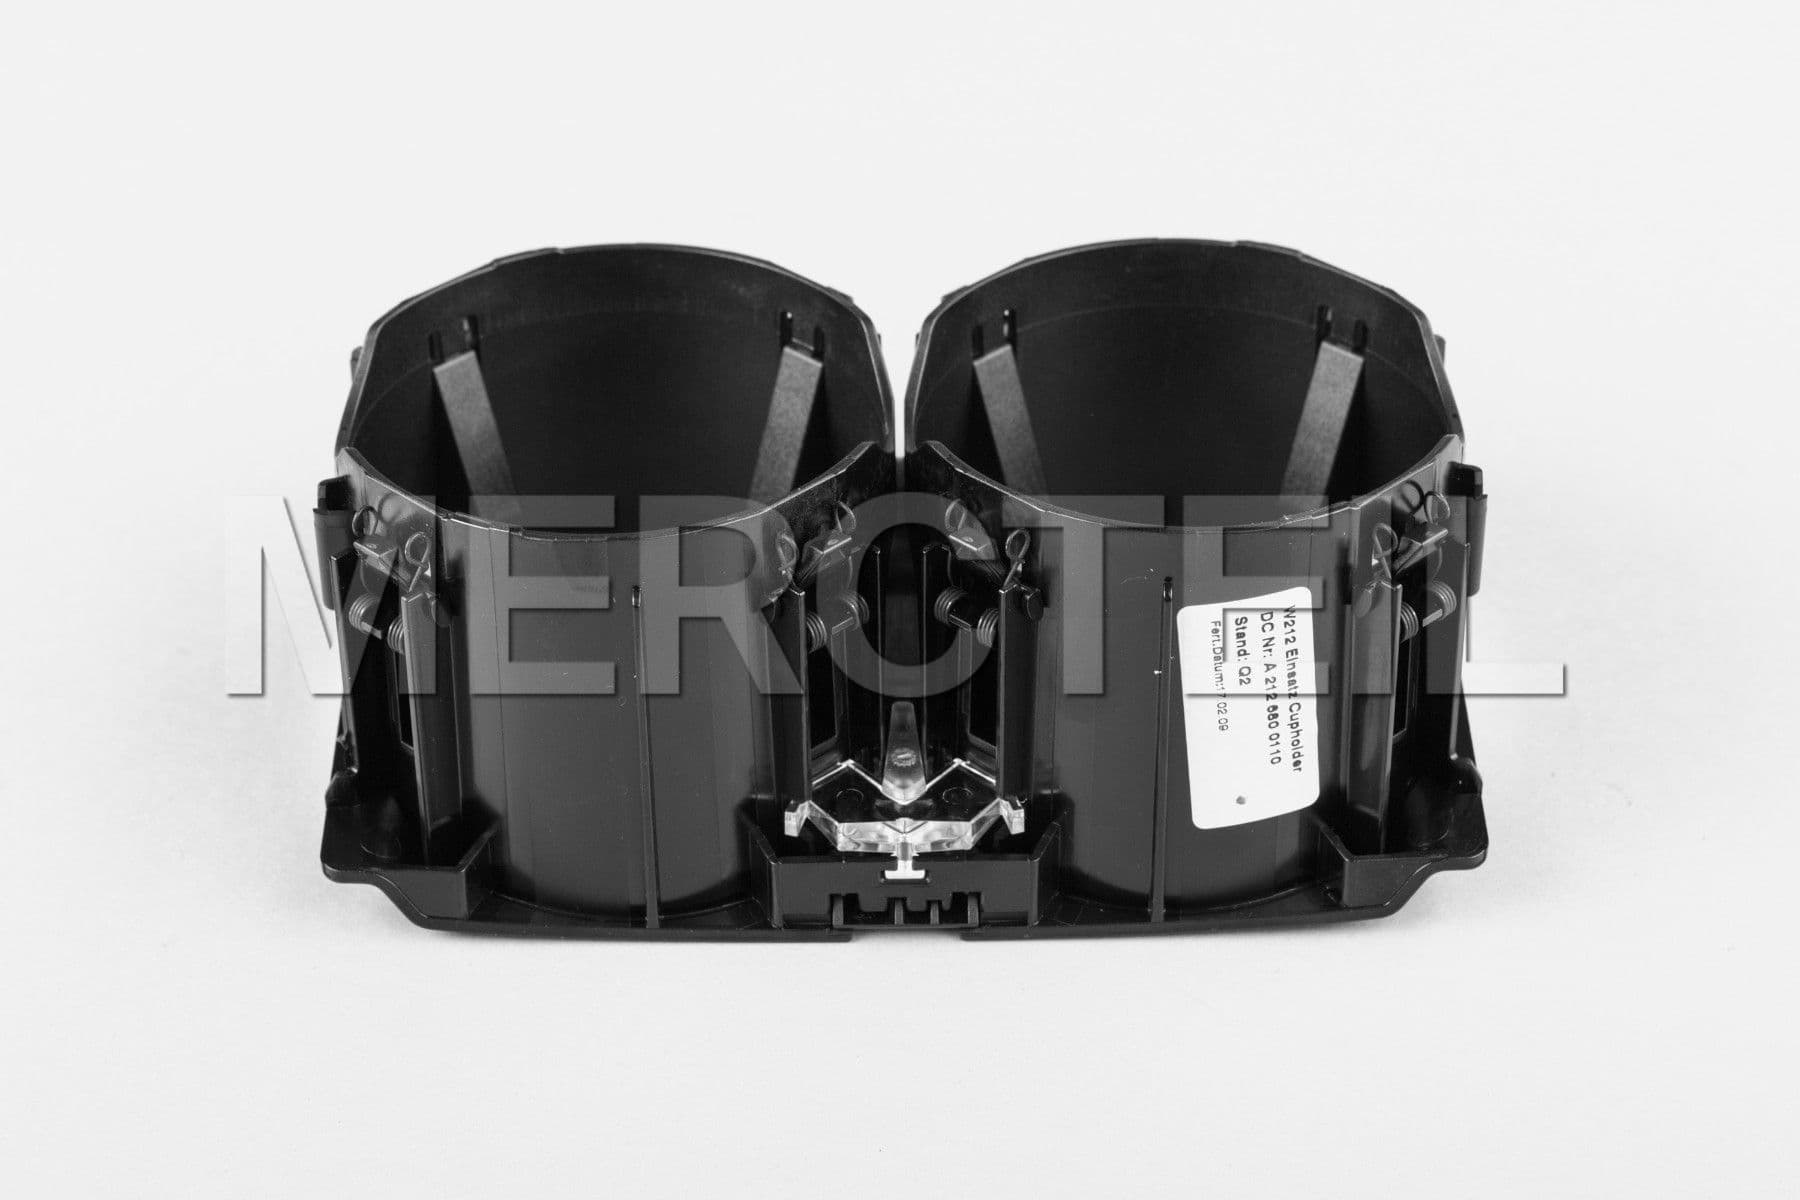 Mercedes-Benz Cupholder for E-Class (part number: 	
A2126800110)